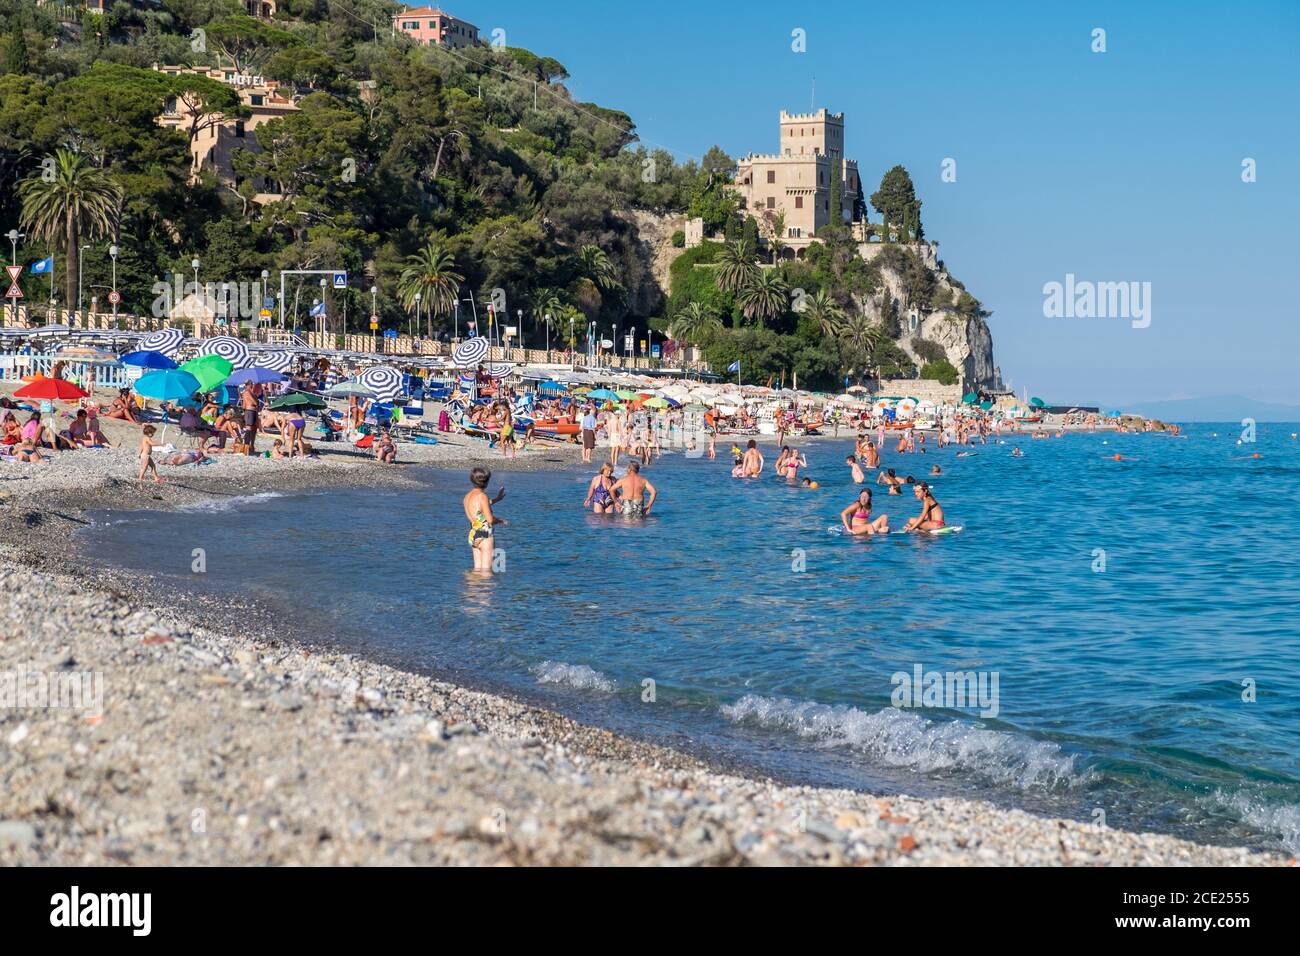 Beach and people swimming in the sea at Finale Ligure, Liguria, Italy Stock Photo